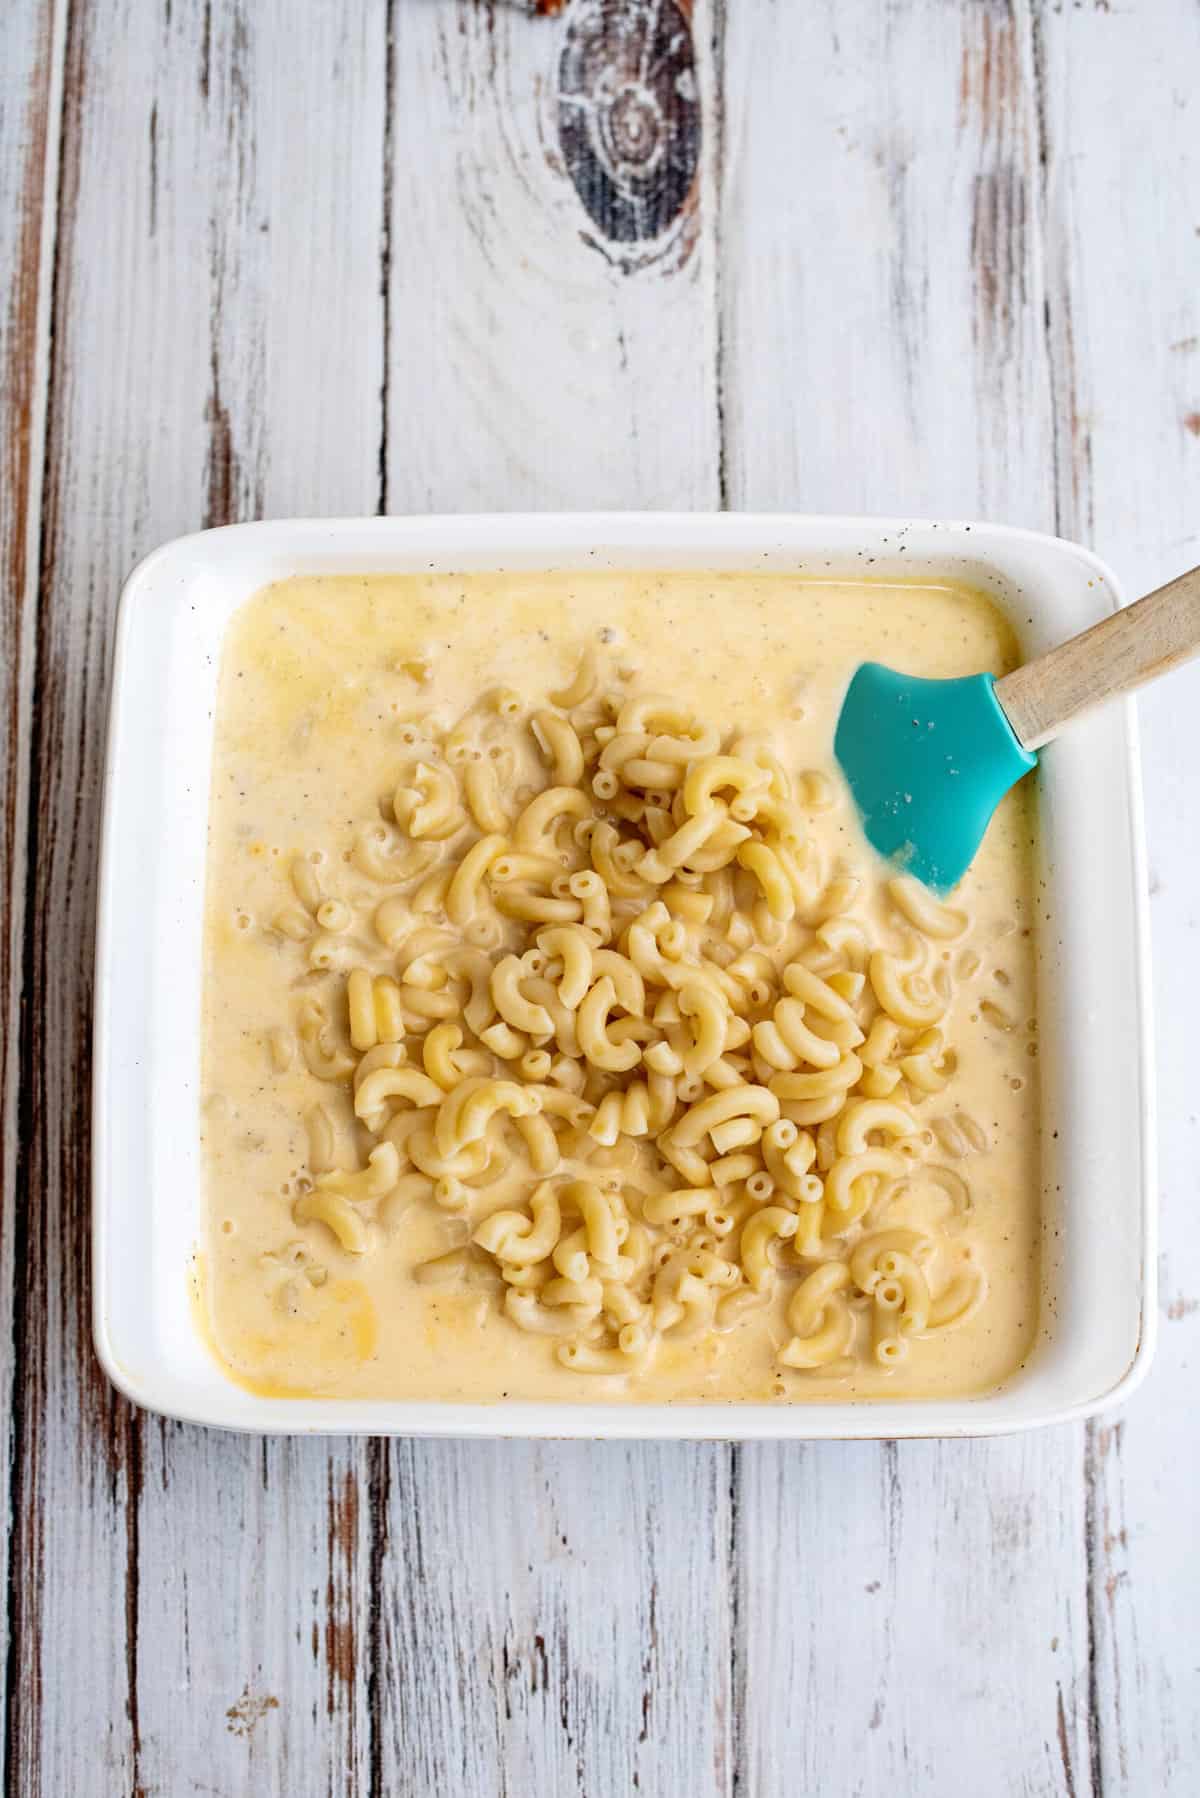 pour the drained macaroni into the Velveeta mac and cheese sauce and stir.